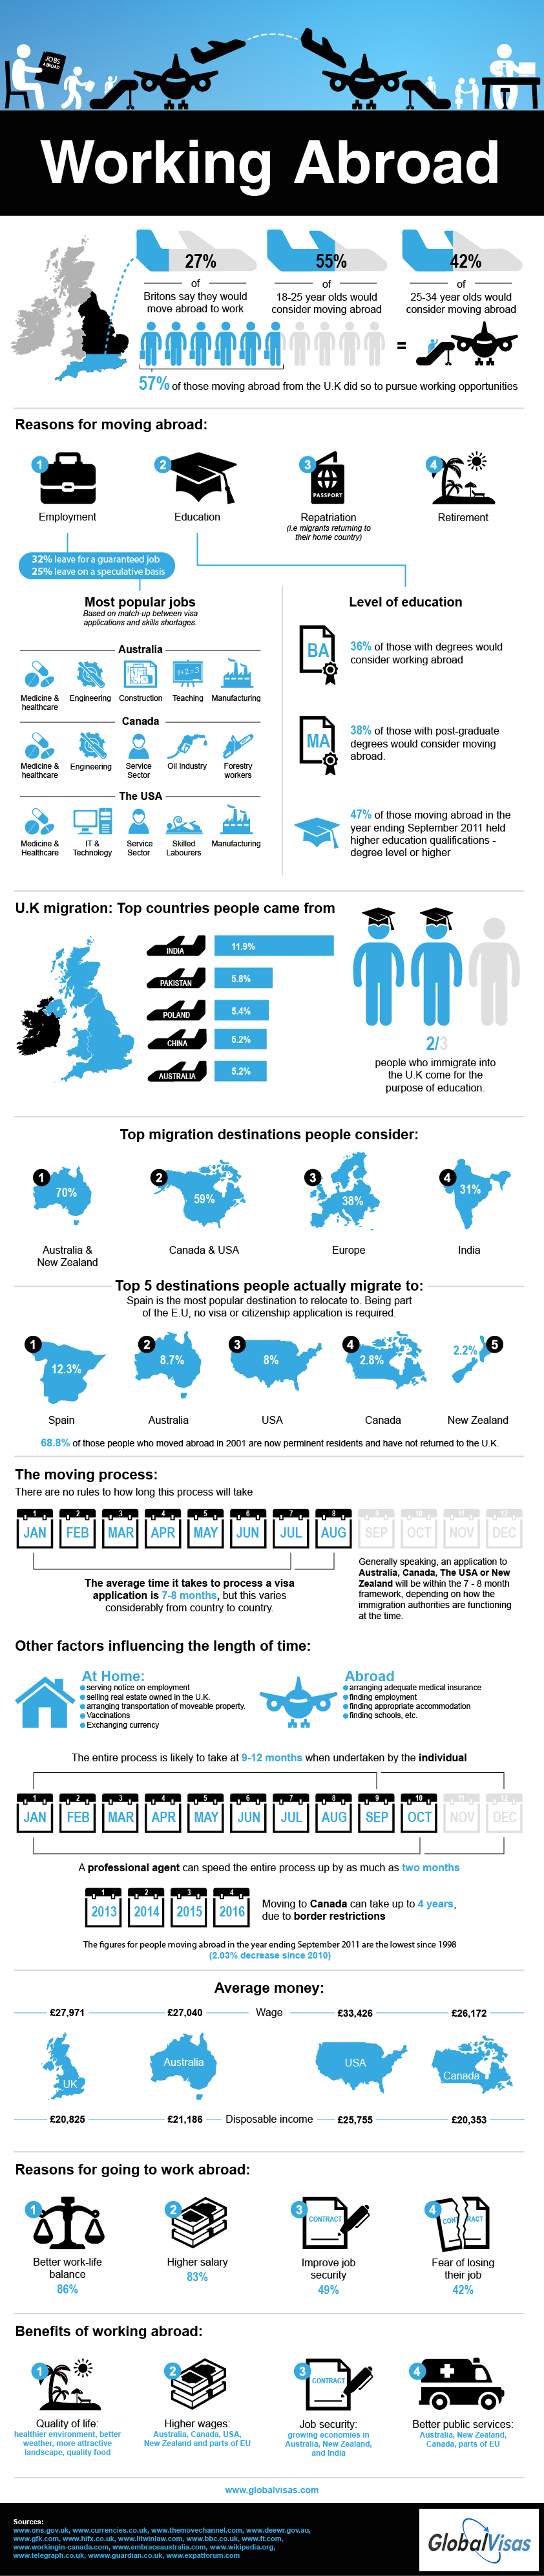 working abroad infographic